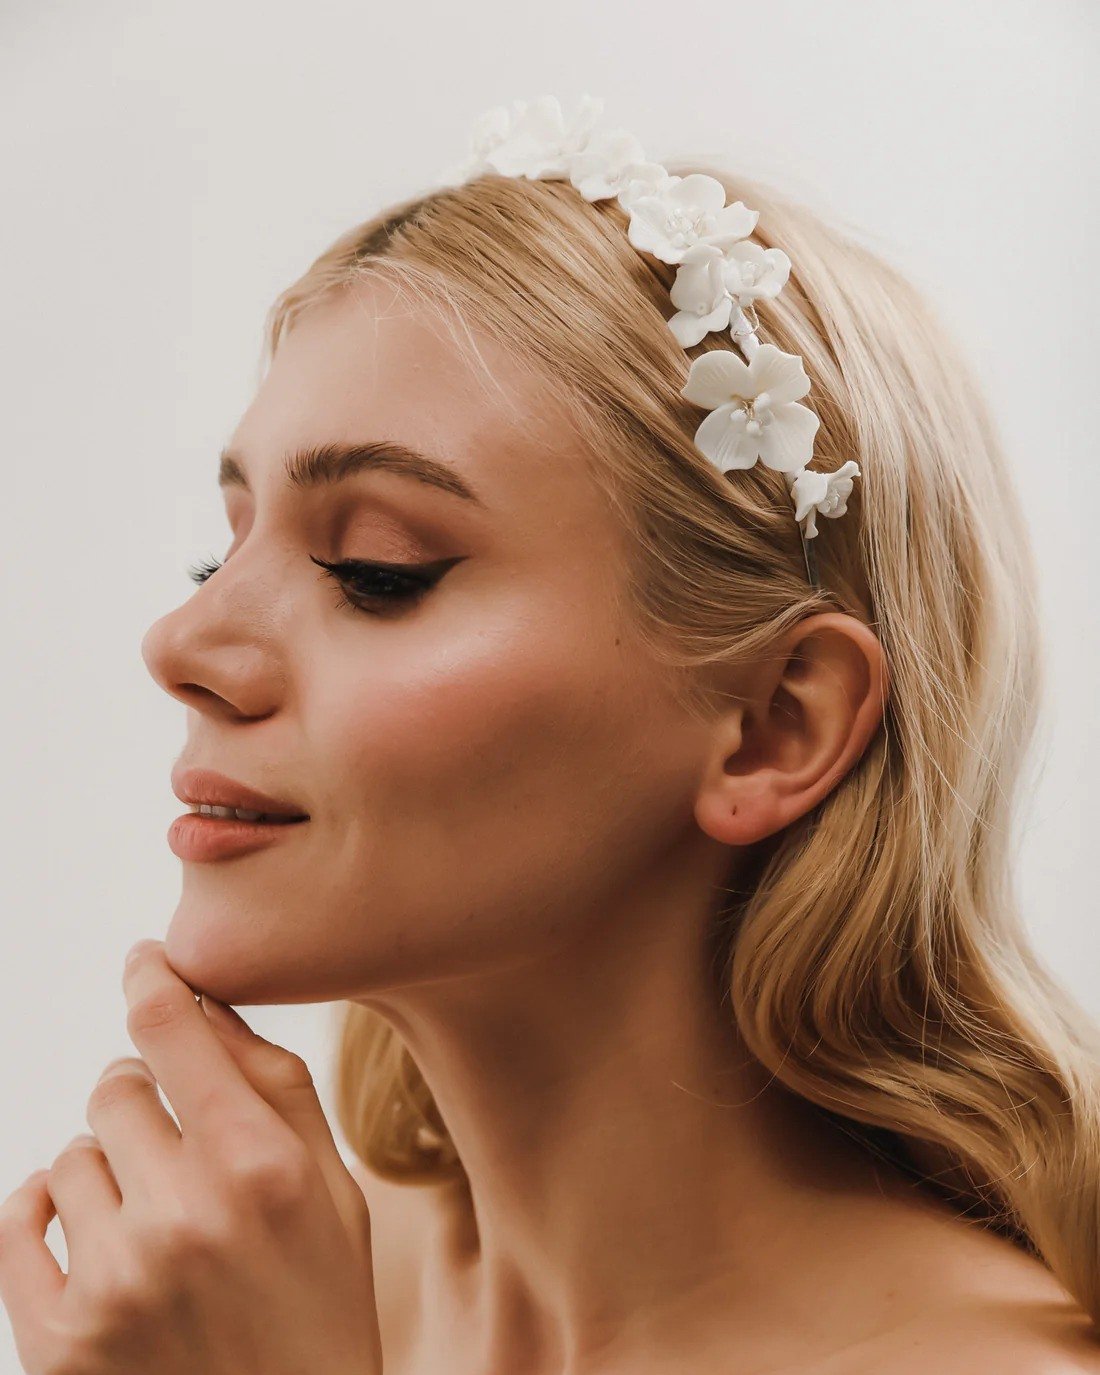 ✨ Looking for some botanical inspired jewelry for your Spring or Summer wedding? Look no further than our collection of high quality with the latest trend from Heirloom Bridal Company!!! / Vous cherchez des bijoux d&rsquo;inspiration botanique pour v